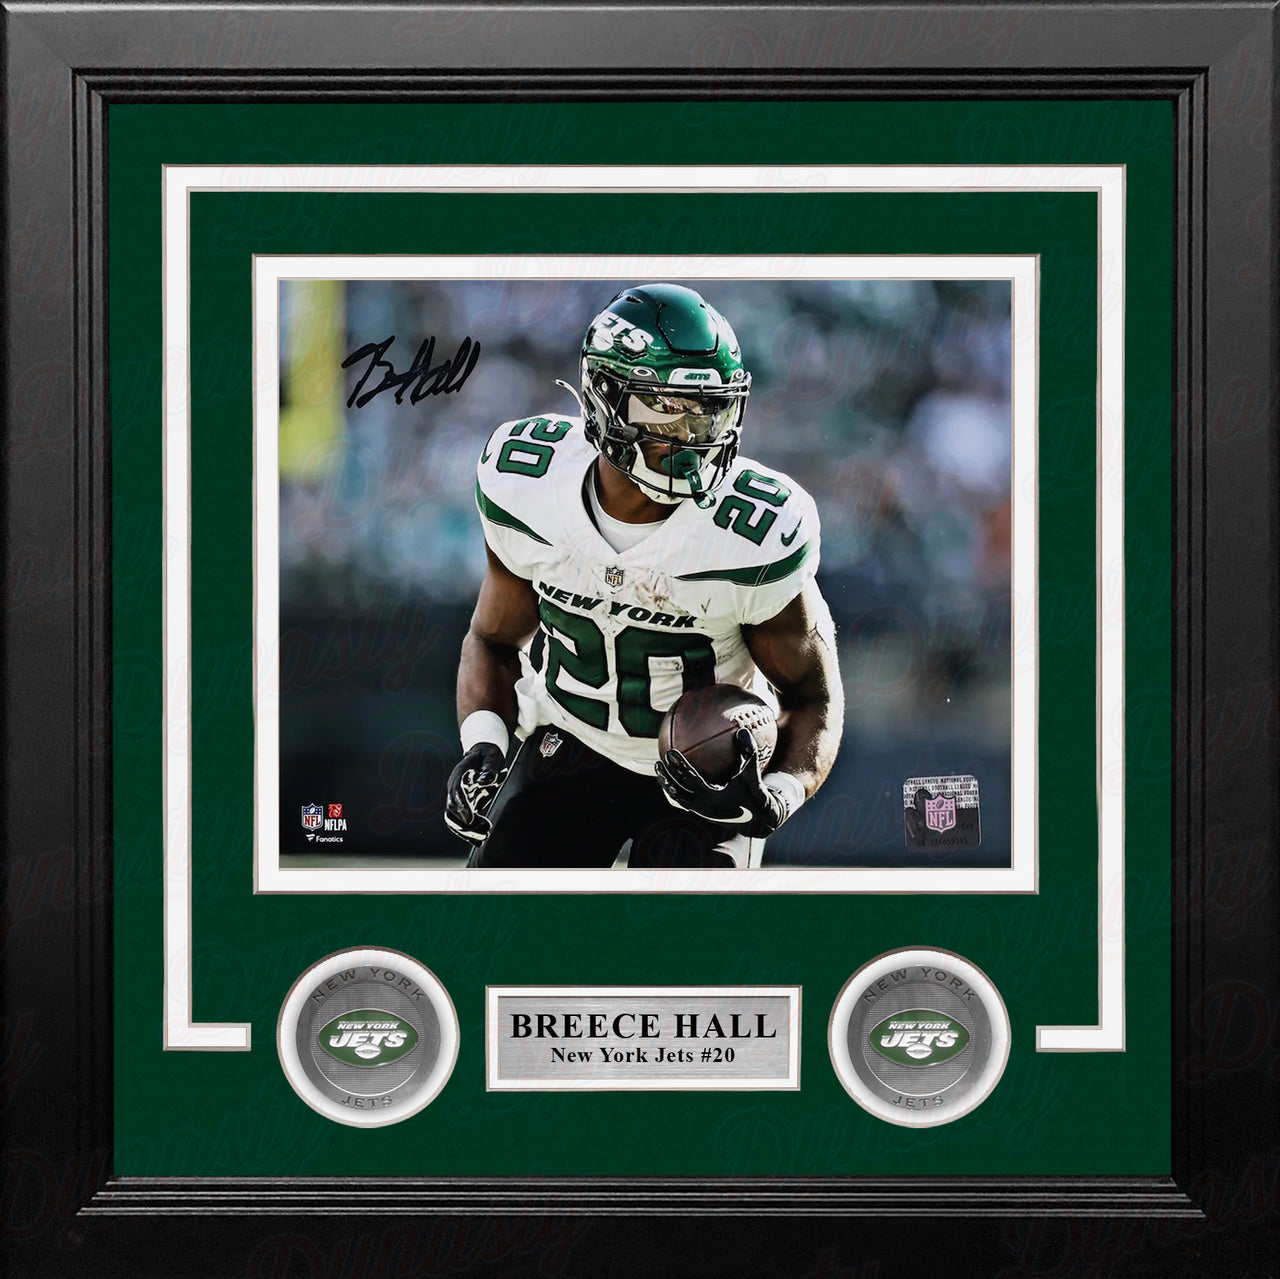 Breece Hall in Action New York Jets Autographed 8" x 10" Framed Football Photo